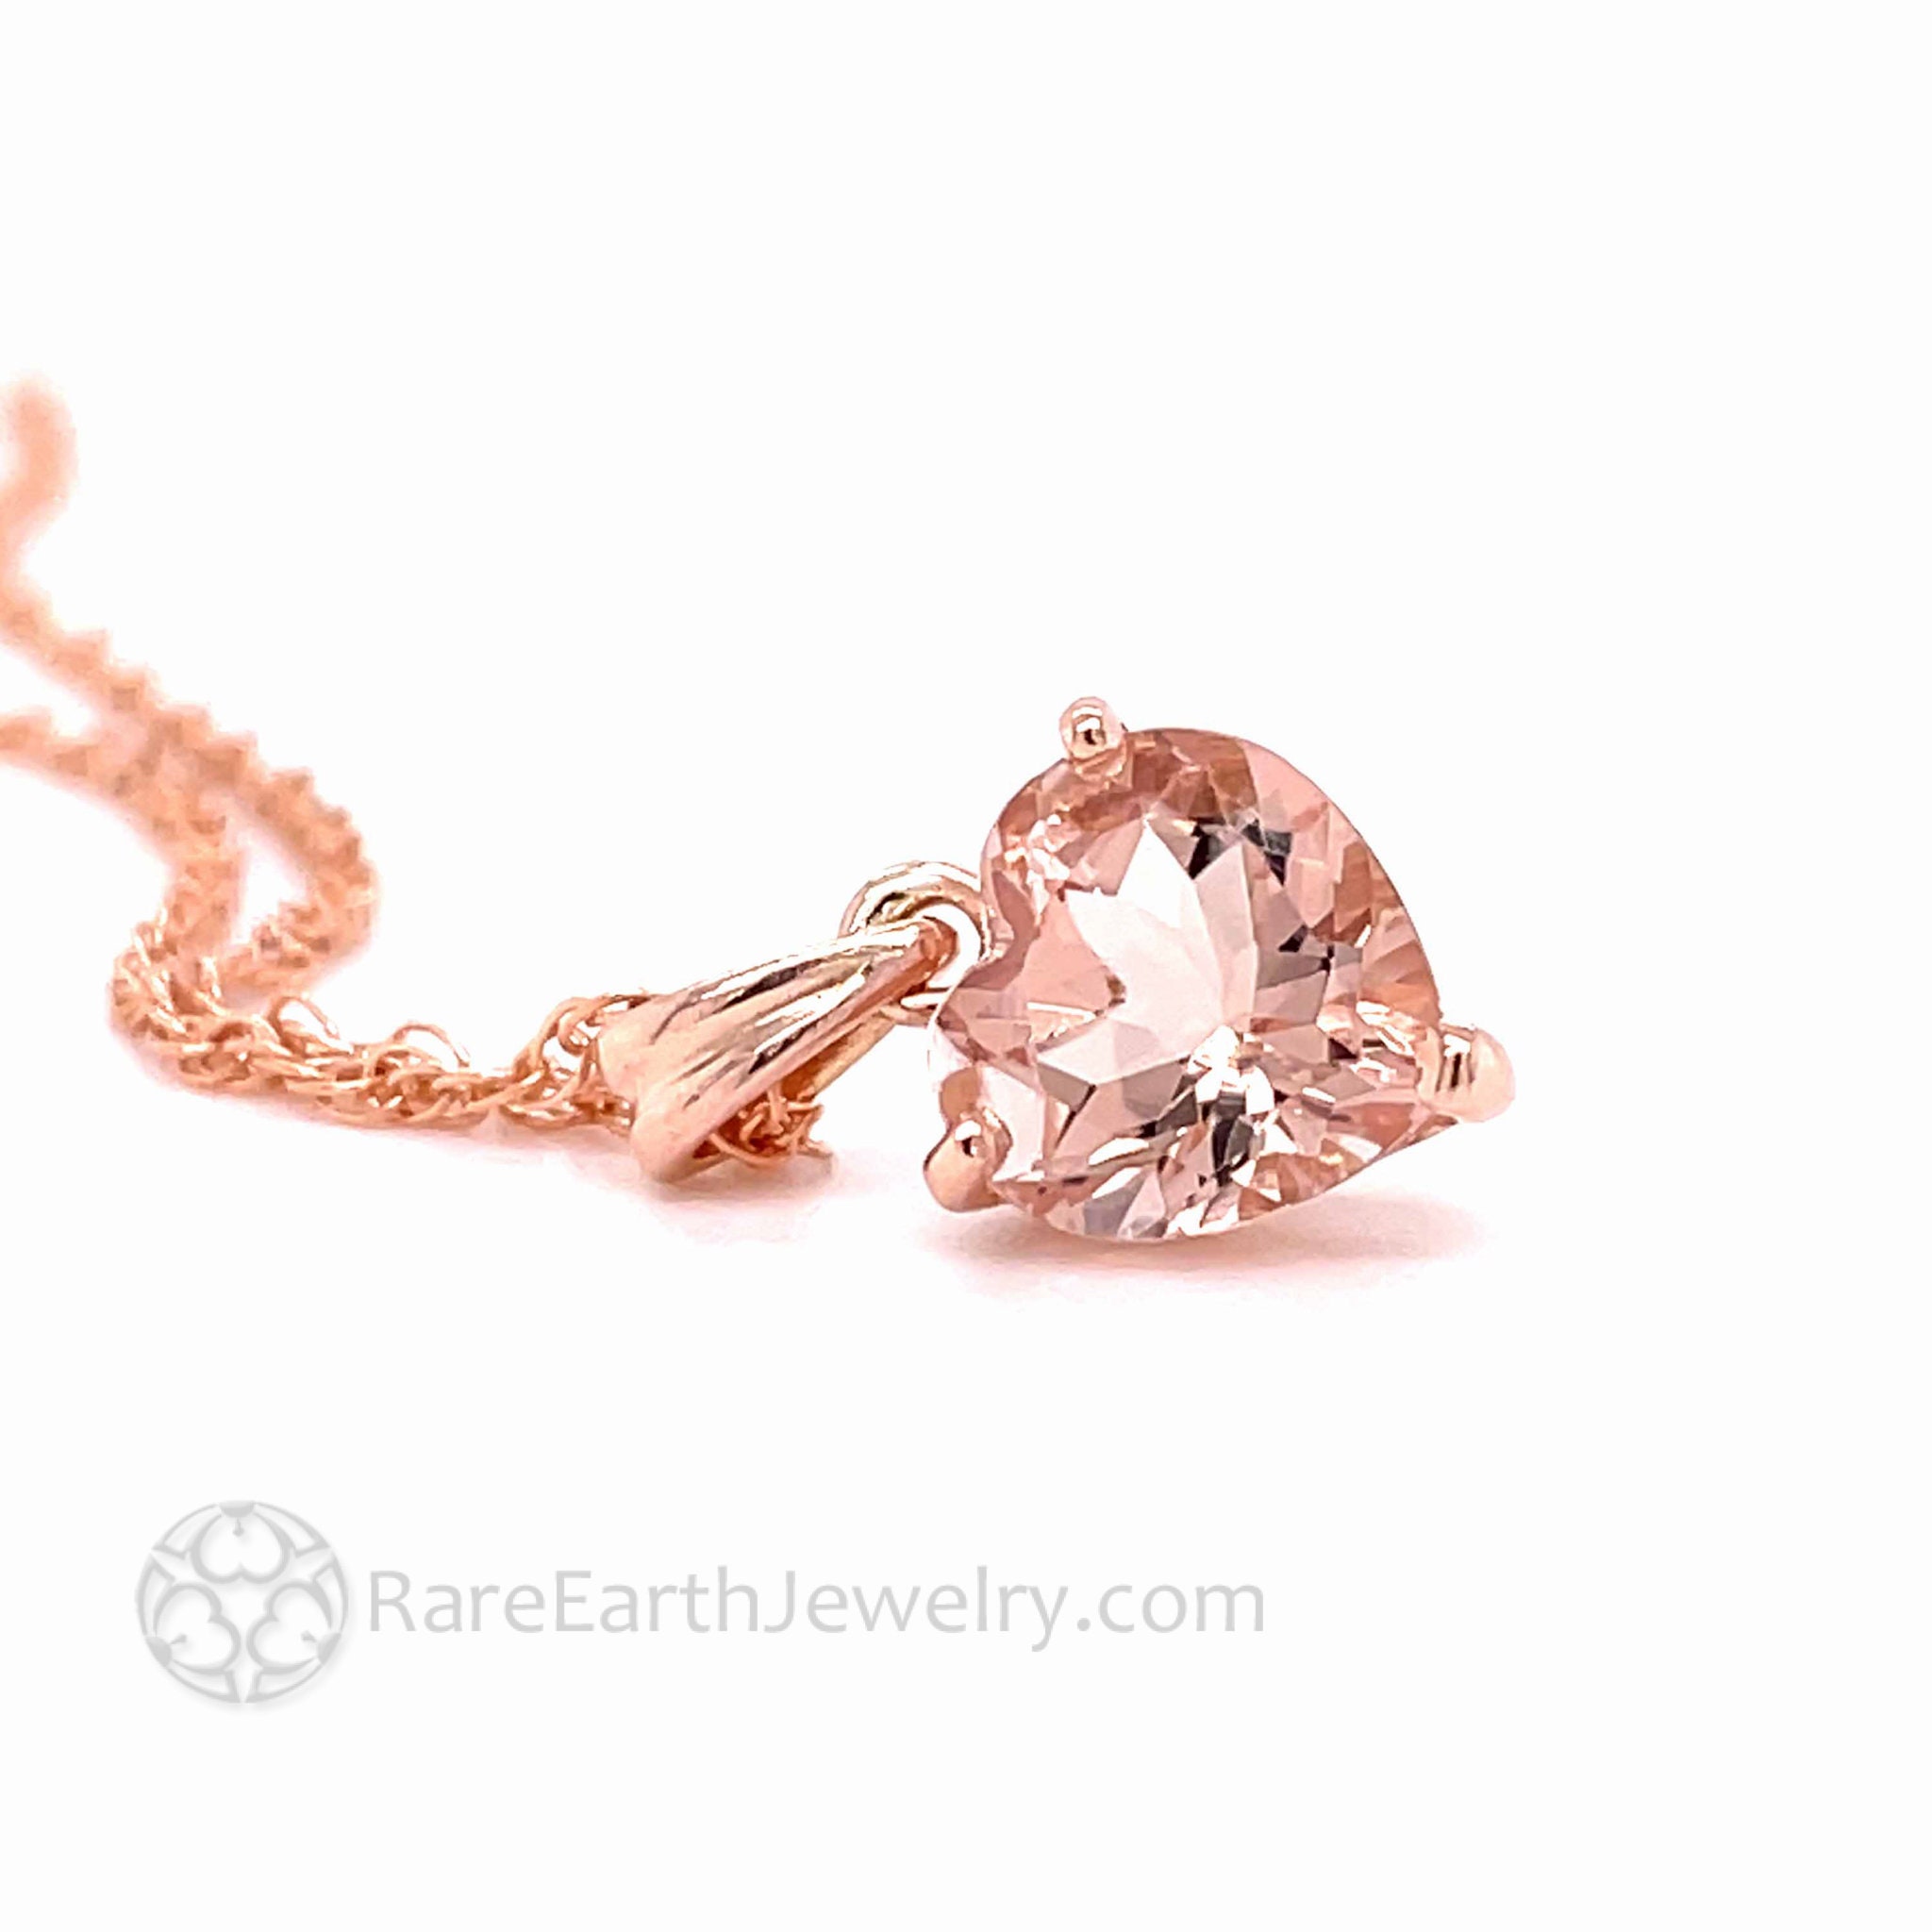 Certified and Appraised 14K Rose Gold 5.05 Ct AAA Morganite Pendant -  7158692 - TJC